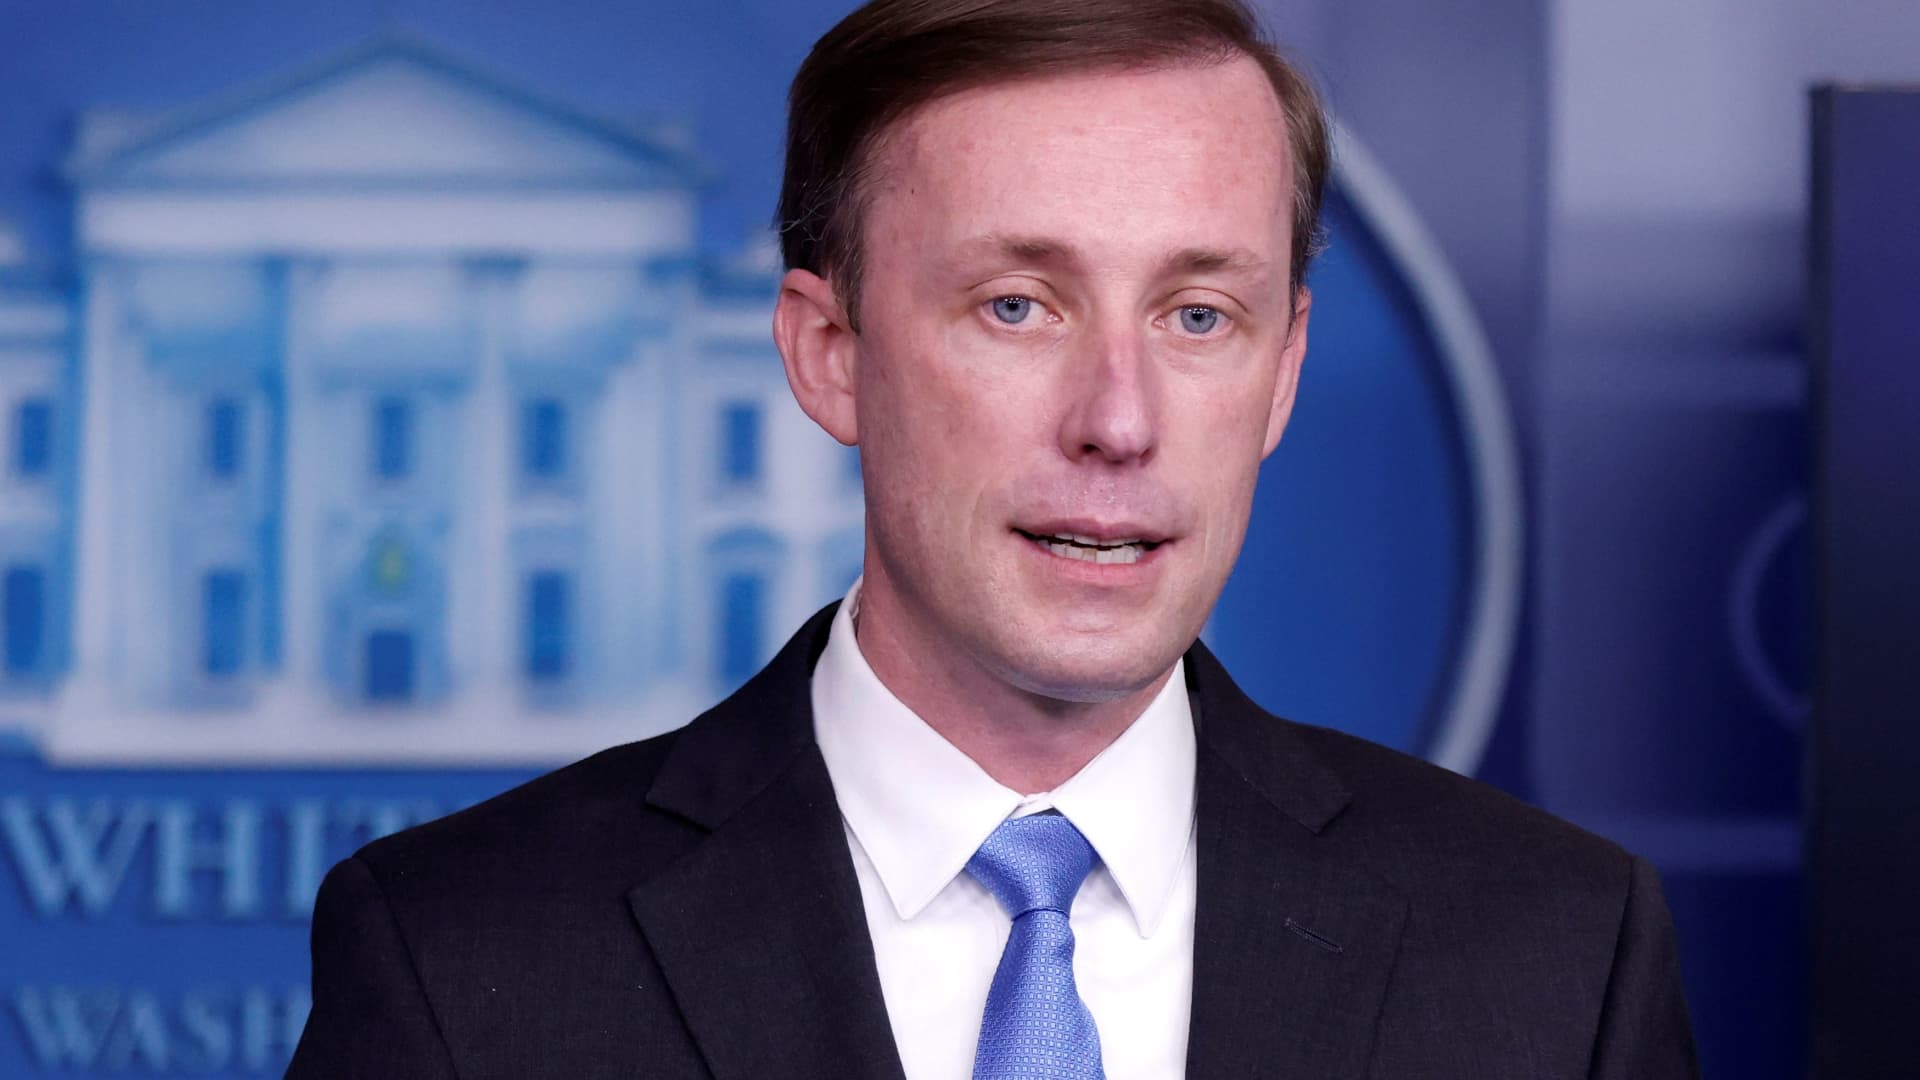 White House National Security Advisor Jake Sullivan delivers remarks during a press briefing inside the White House in Washington, February 4, 2021.